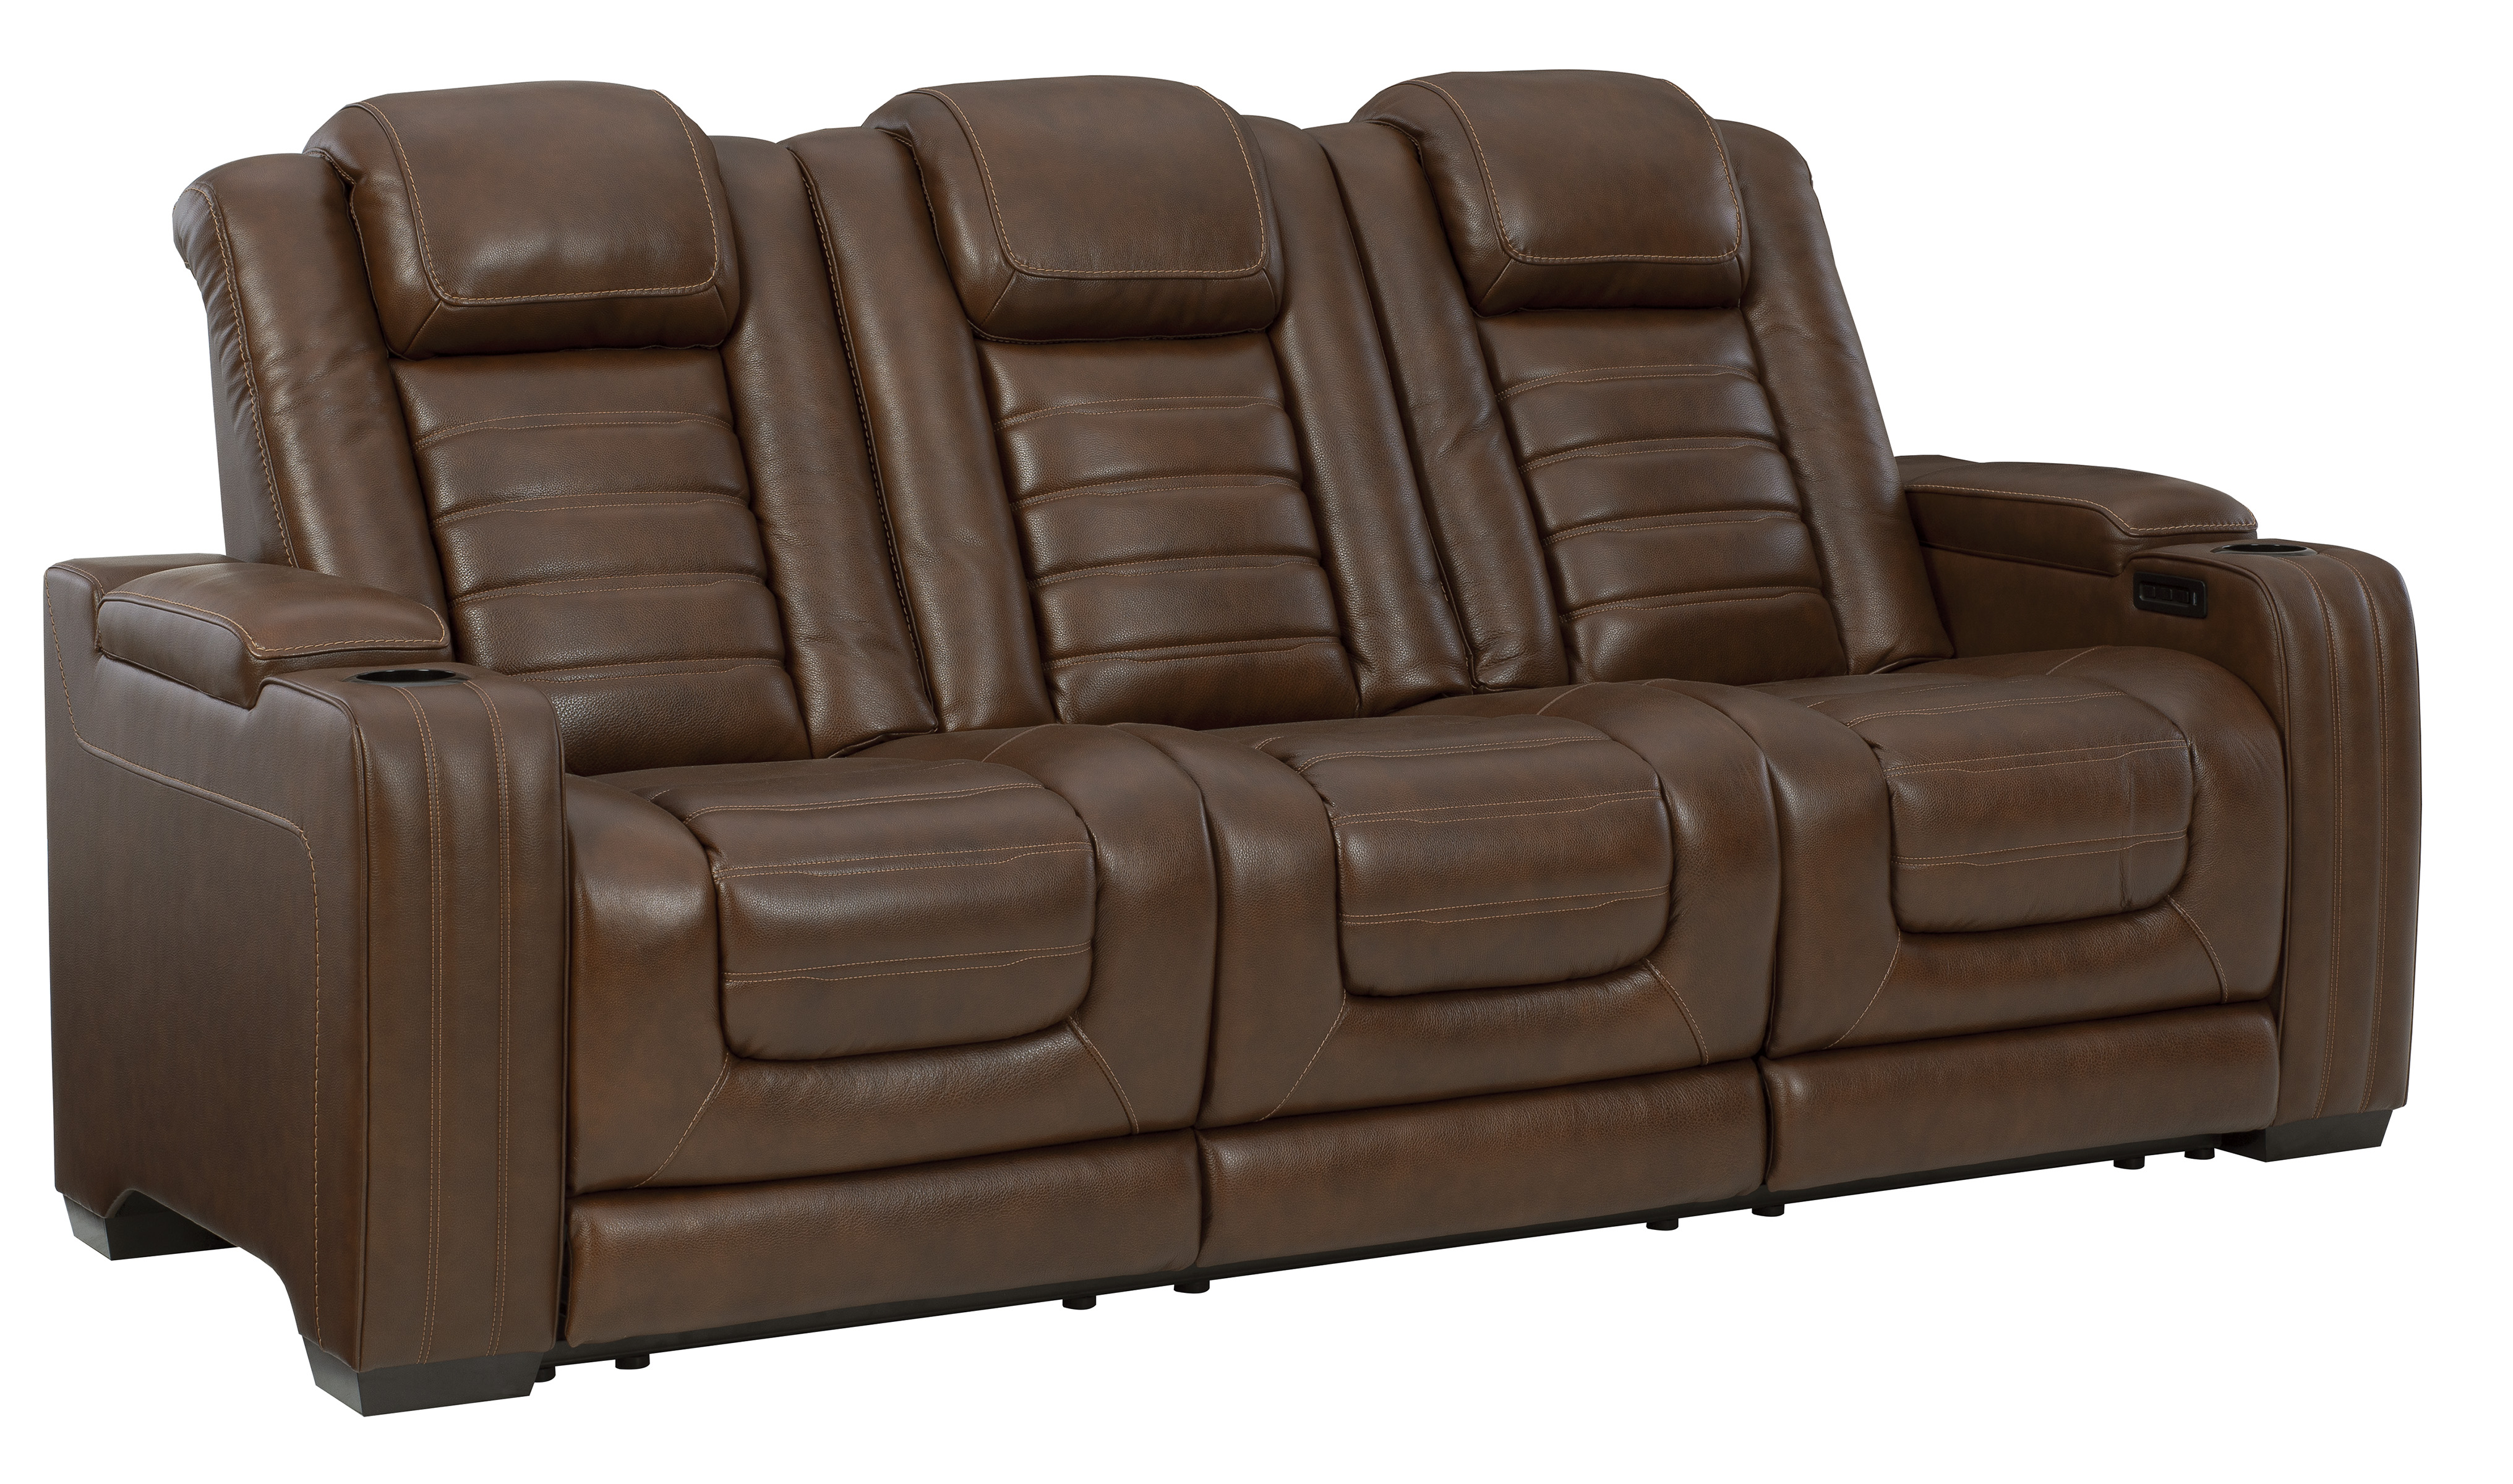 Signature Design by Ashley® Backtrack Chocolate Leather Power Reclining Sofa with Adjustable Headrest